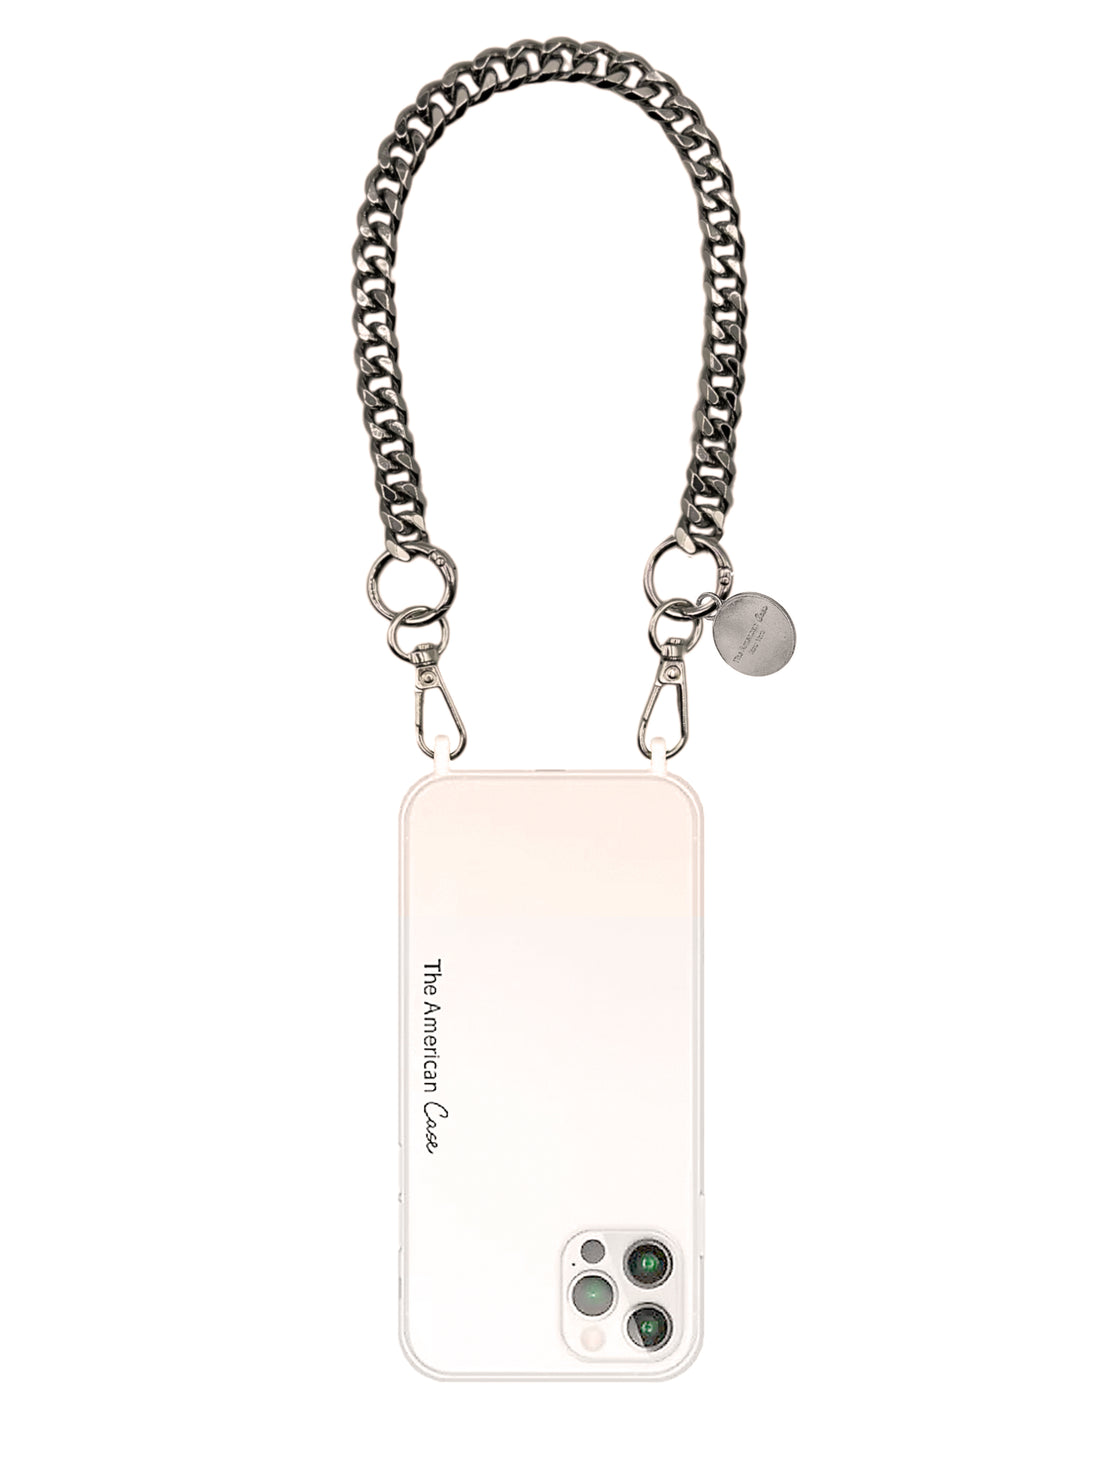 Storm - Metal Bracelet Phone Chain with Silver Carabiners